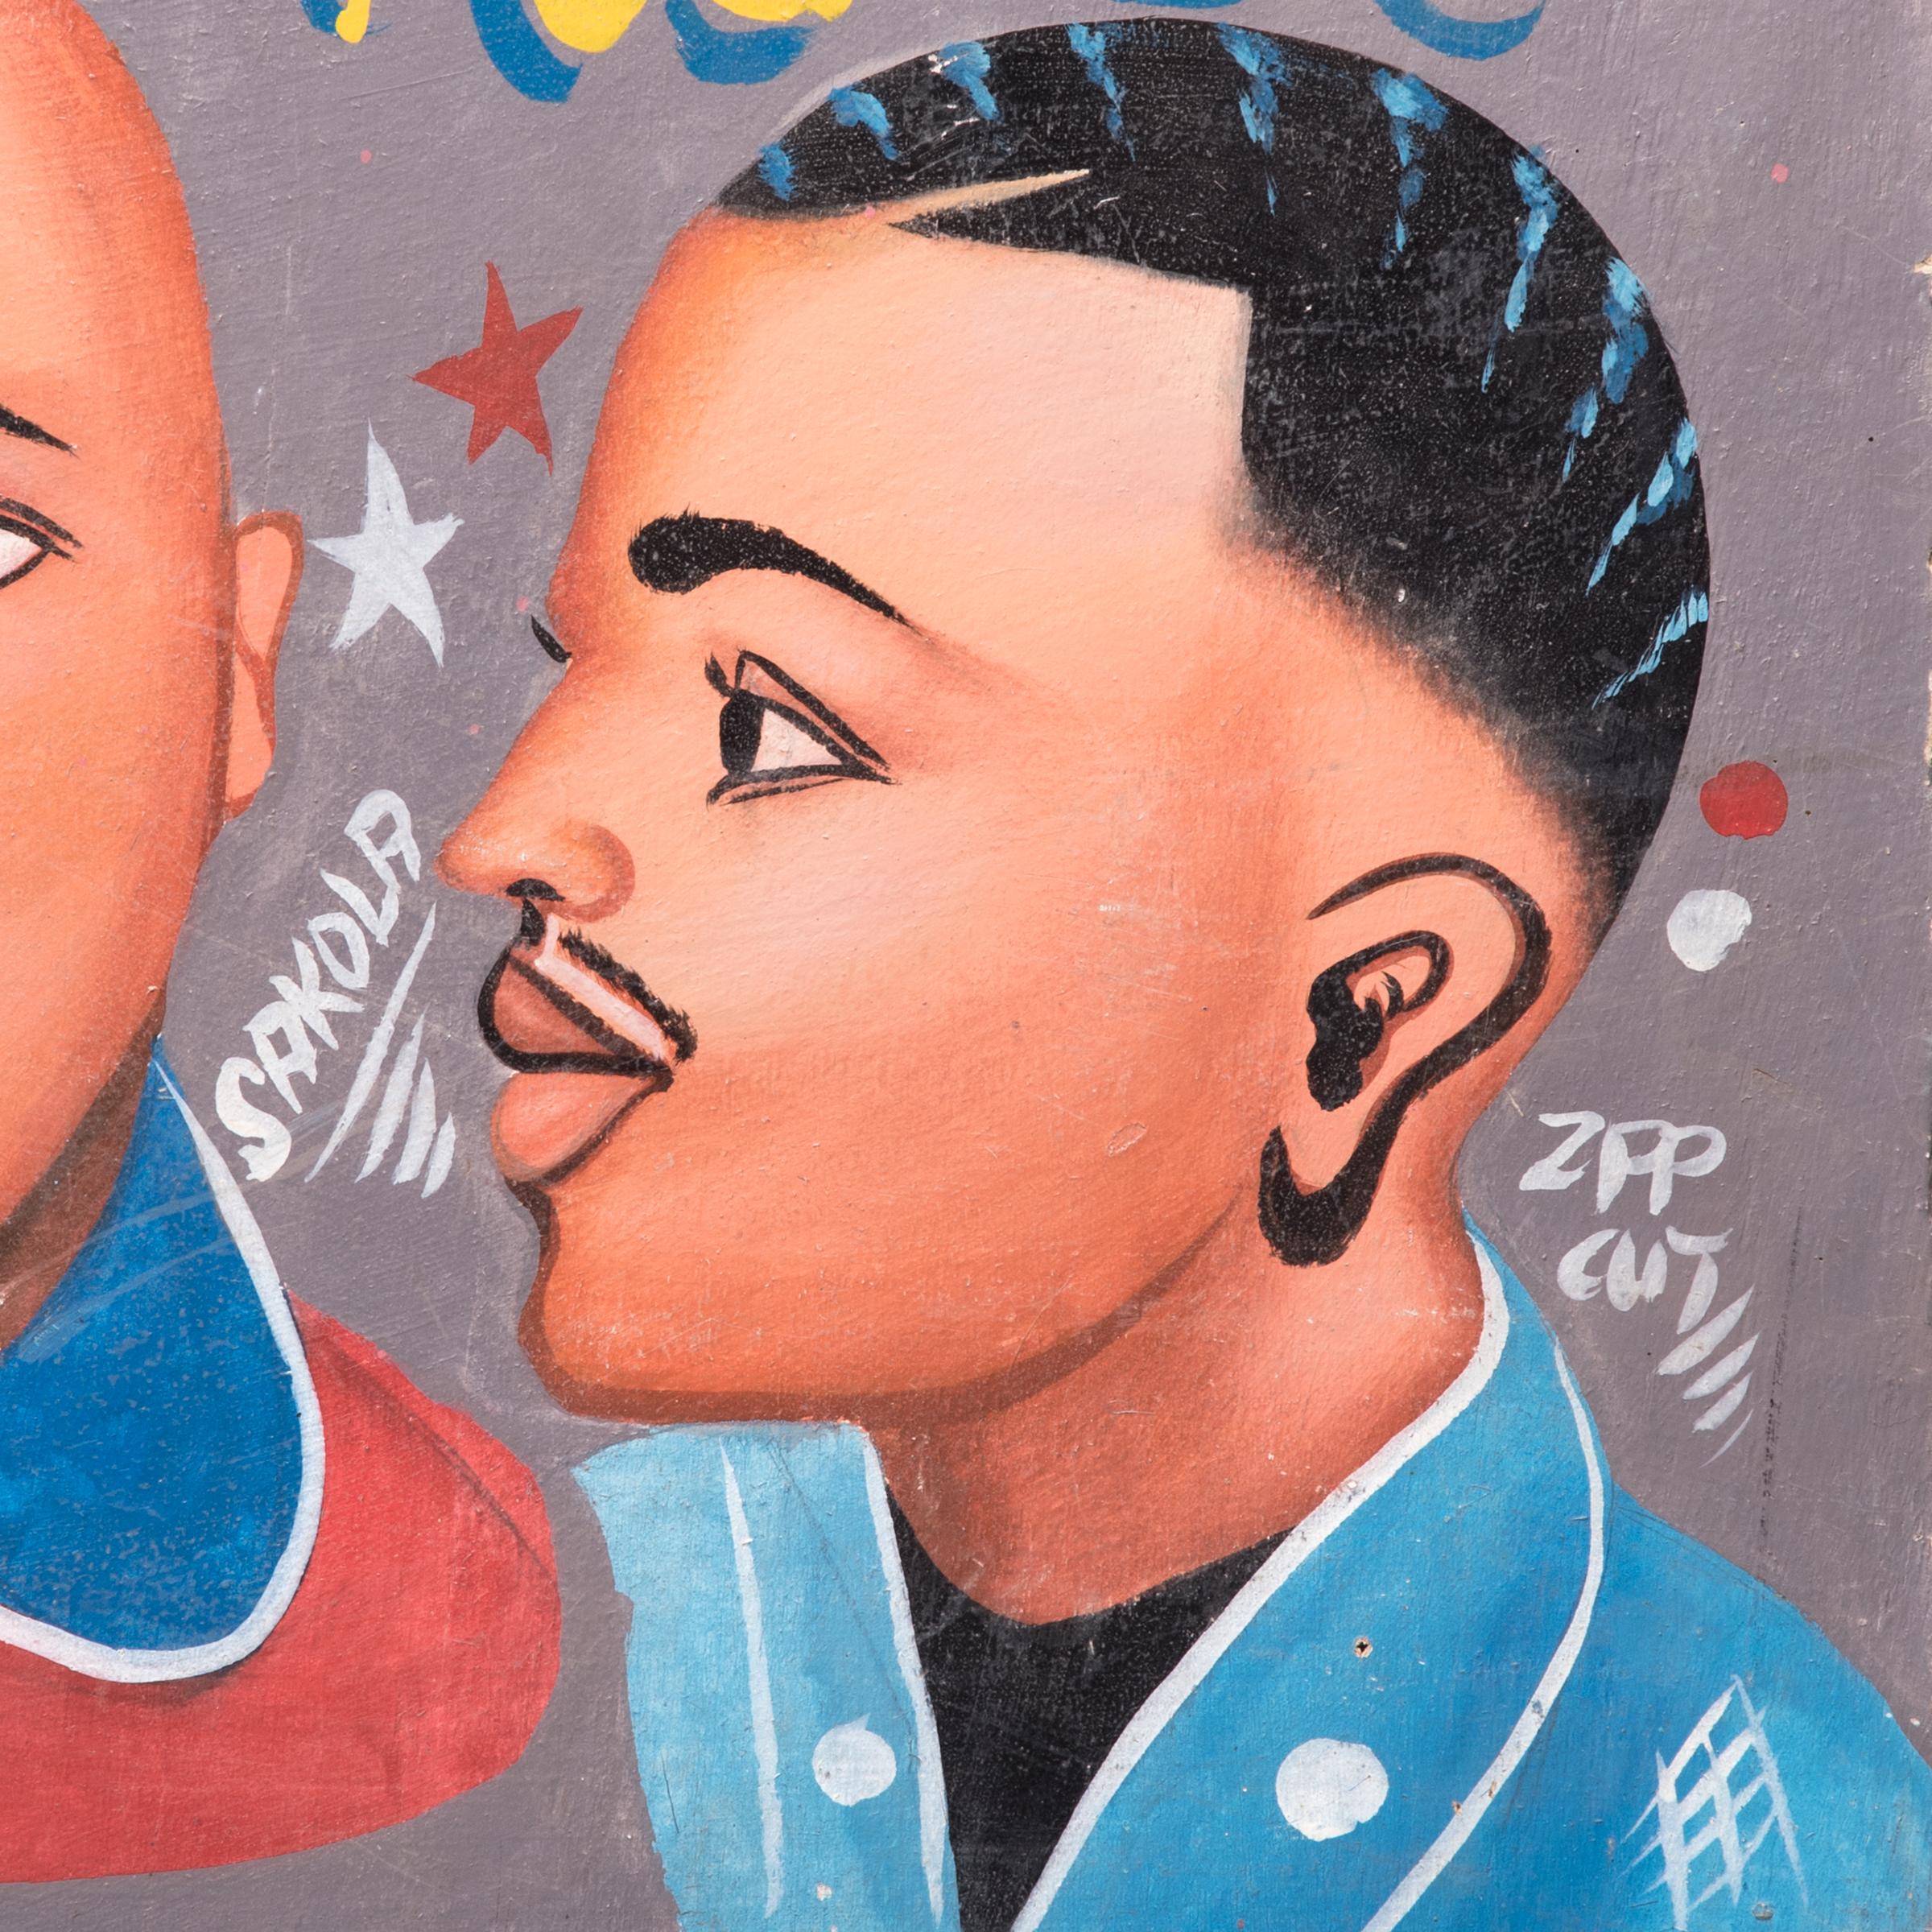 Swinging from trees or mounted to buildings, barbershop signs are fascinating examples of pop and folk art in Africa. Each sign takes on the unique personality of its owner, expressing both their hairdressing options, and the popular icons they